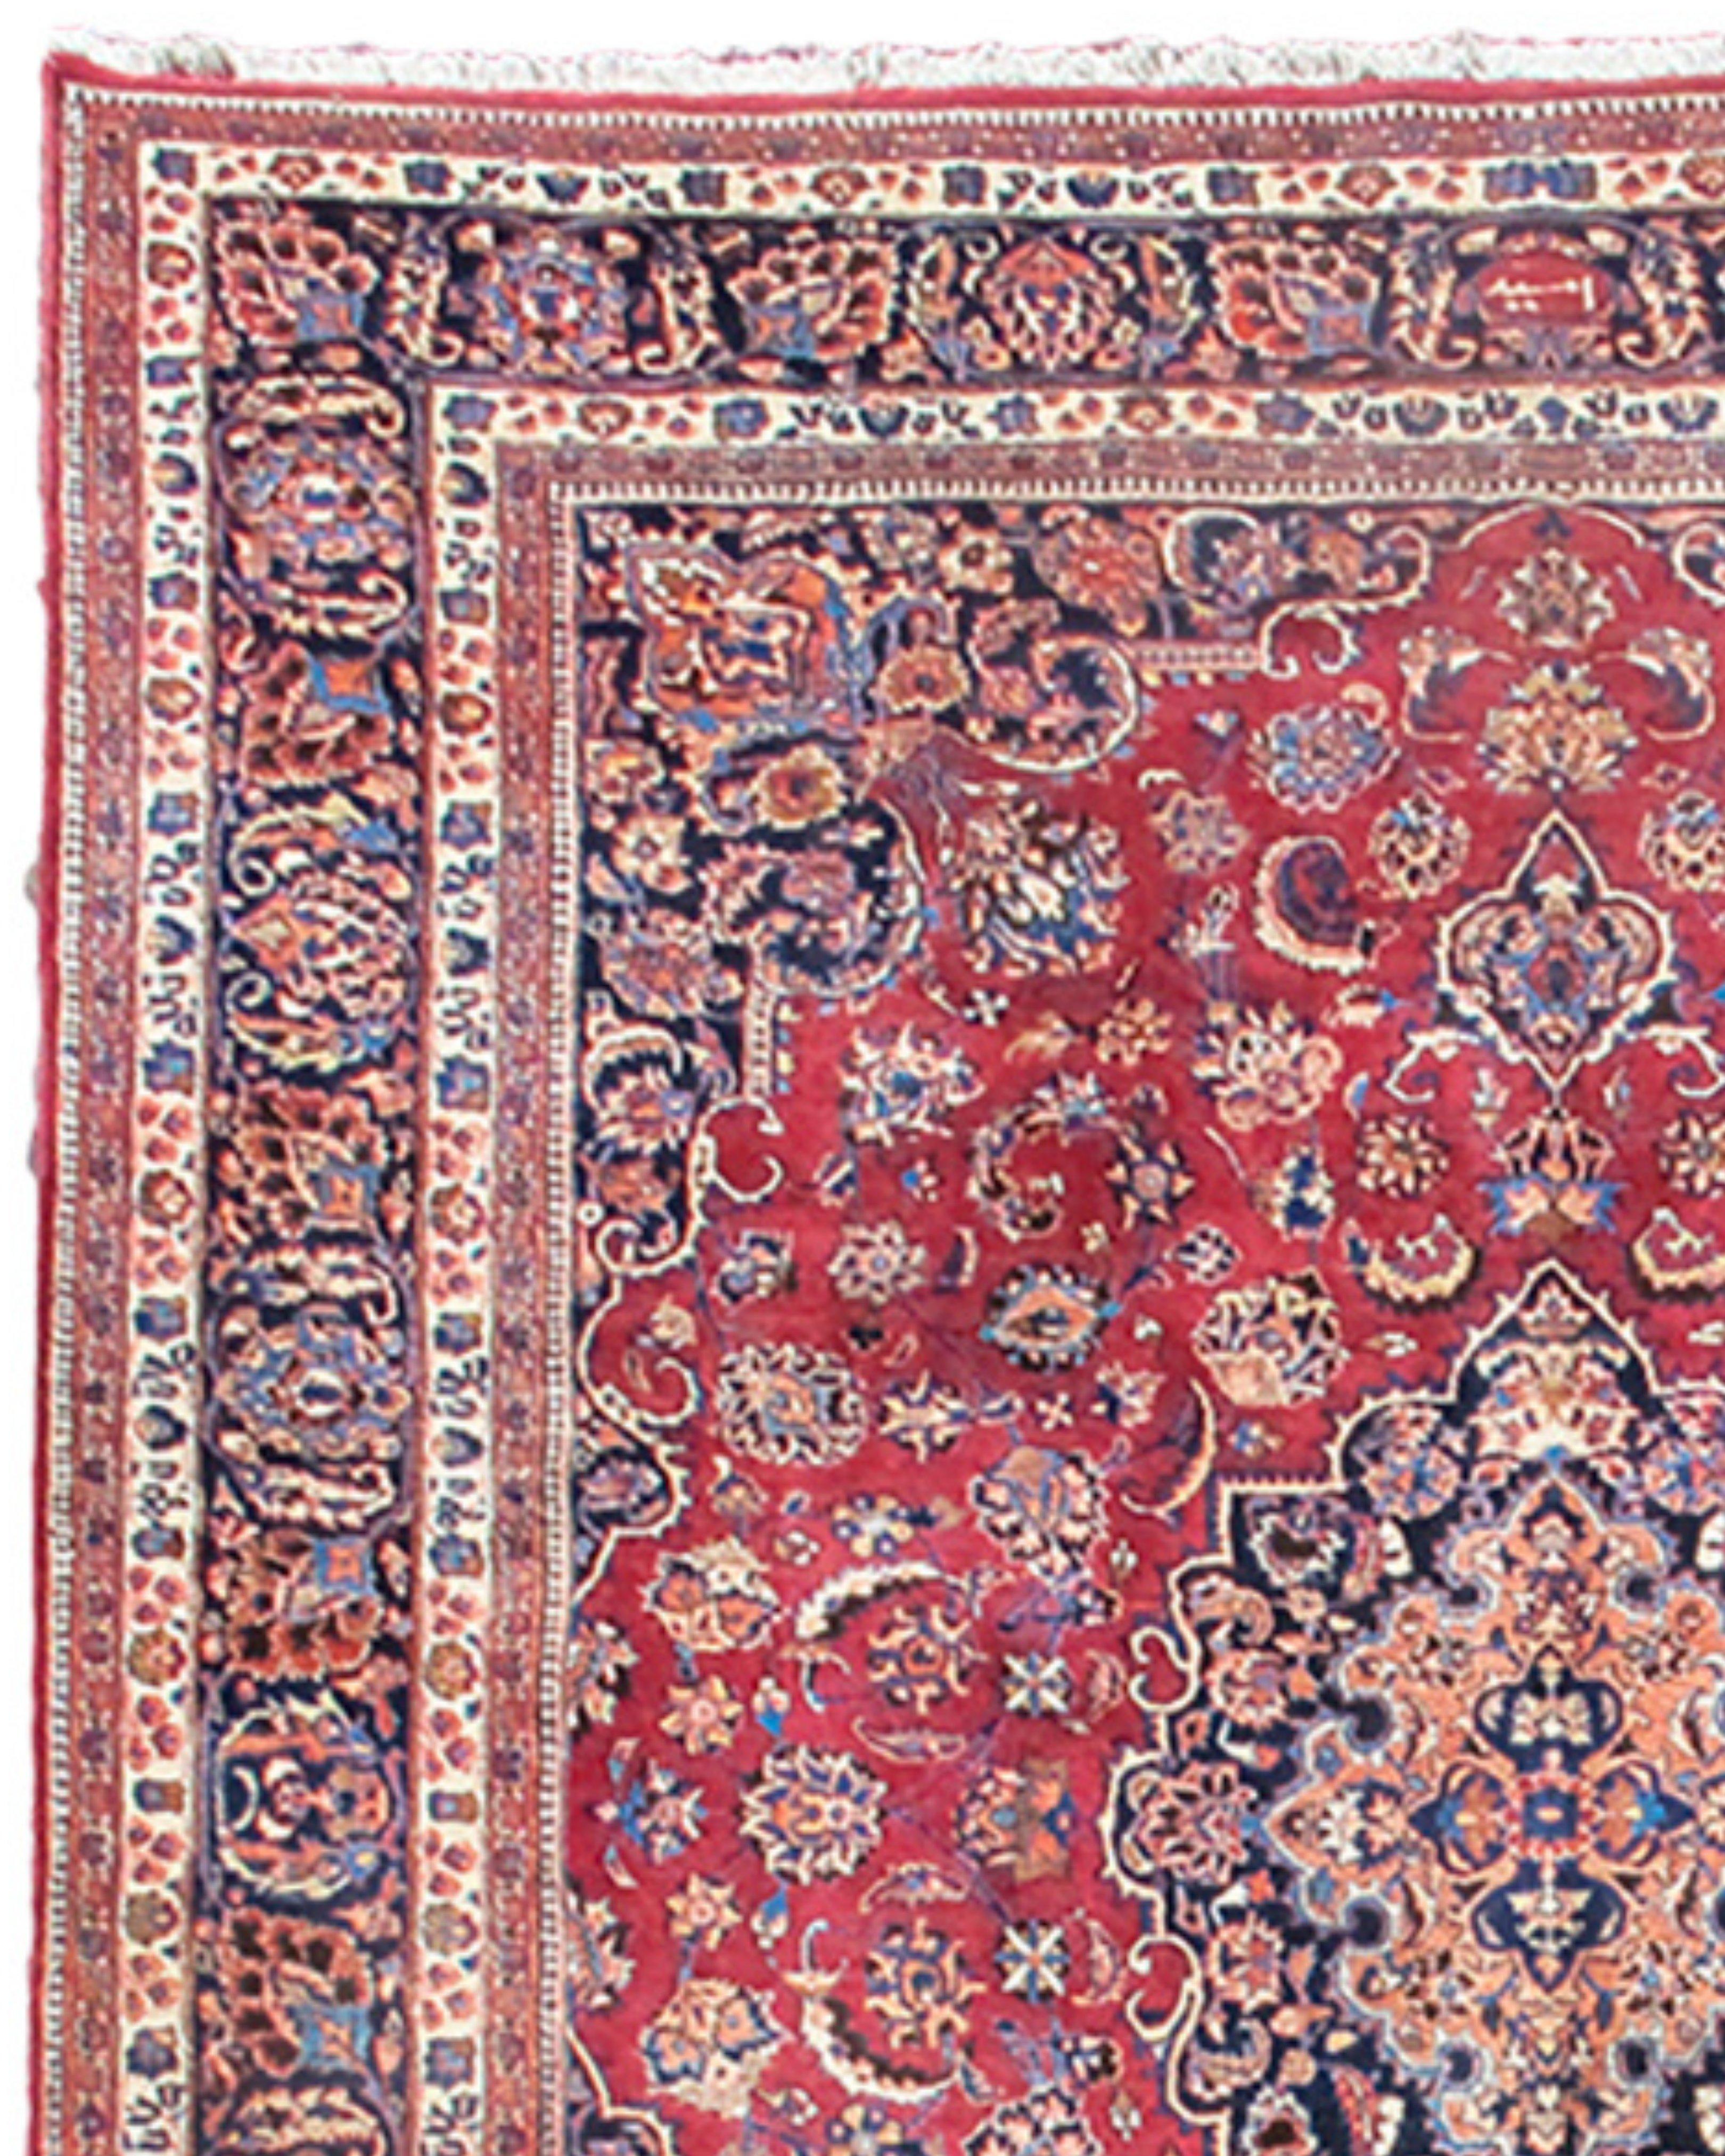 Hand-Knotted Antique Persian Mashad Rug, c. 1900 For Sale